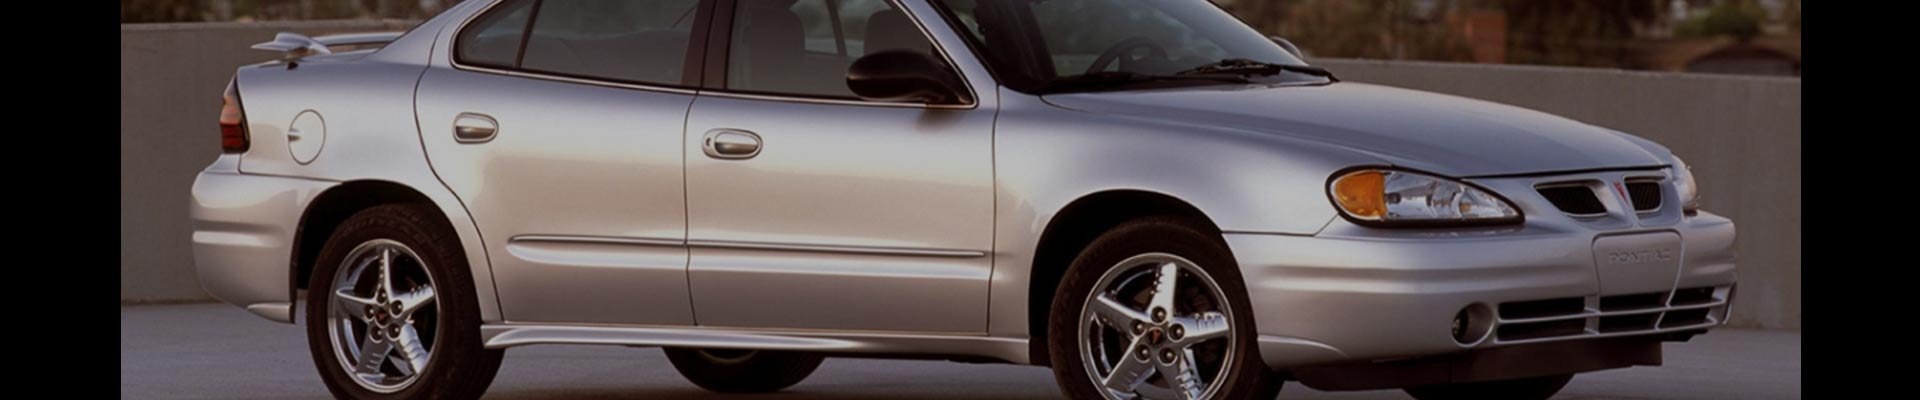 Shop Replacement and OEM 1994 Pontiac Grand Am Parts with Discounted Price on the Net